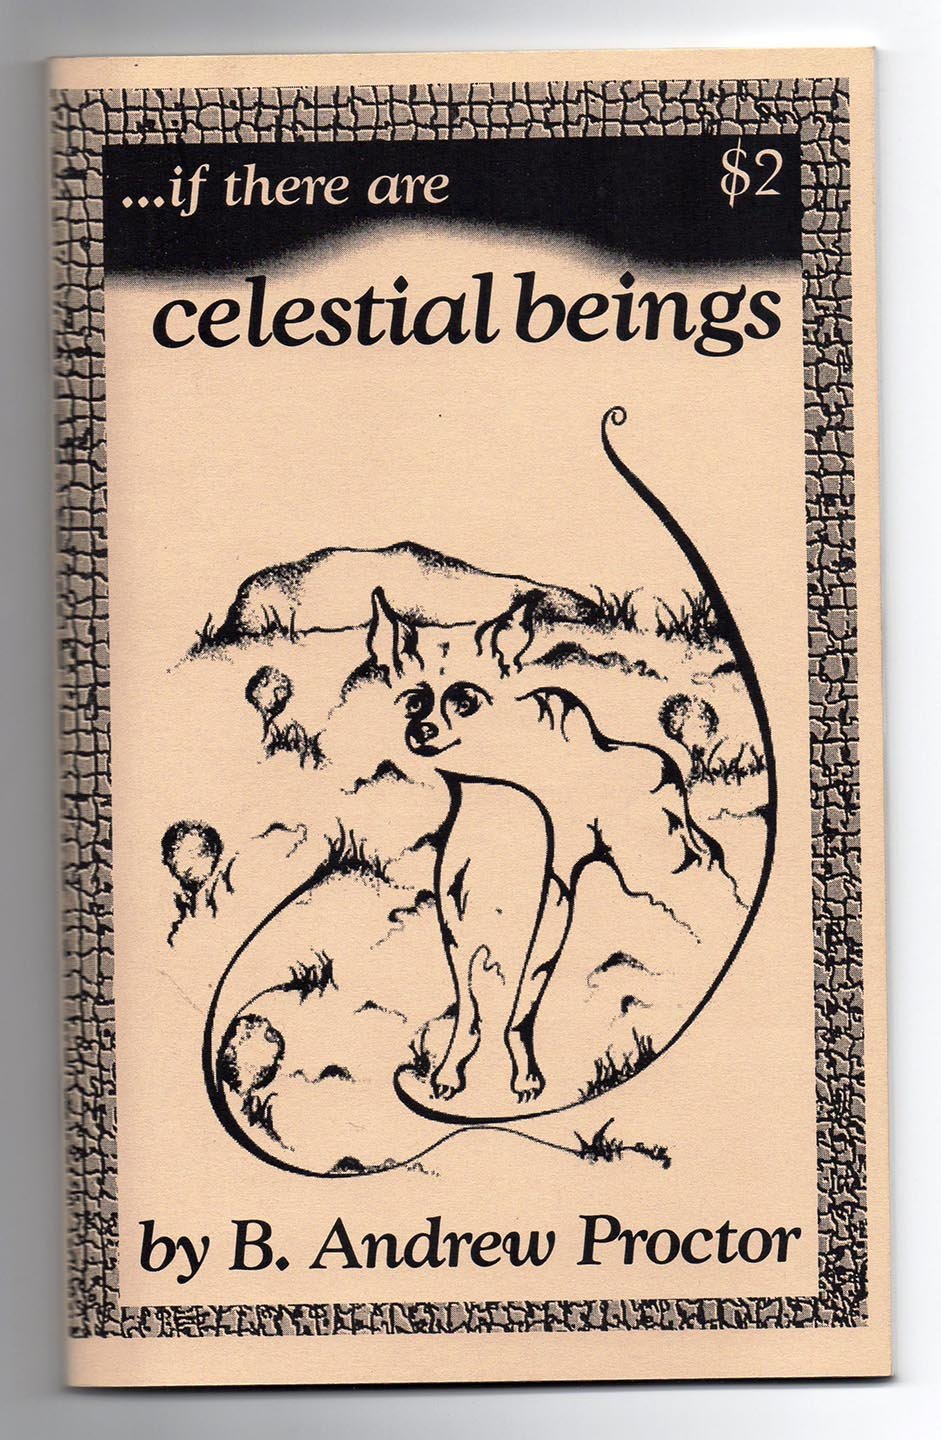 ...if there are celestial beings